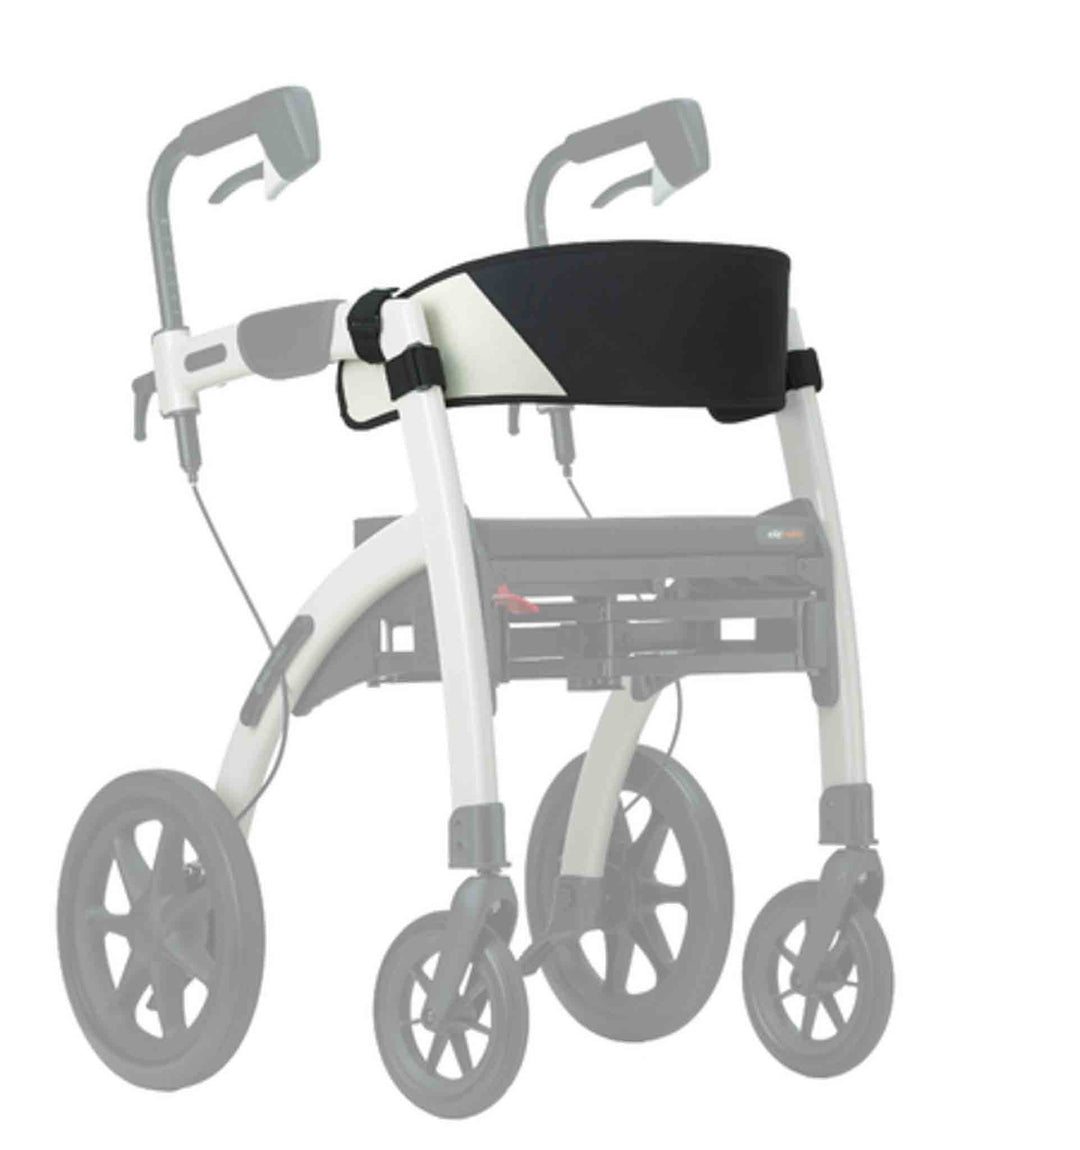 A 'Rollz Motion' walking frame with a backrest attached